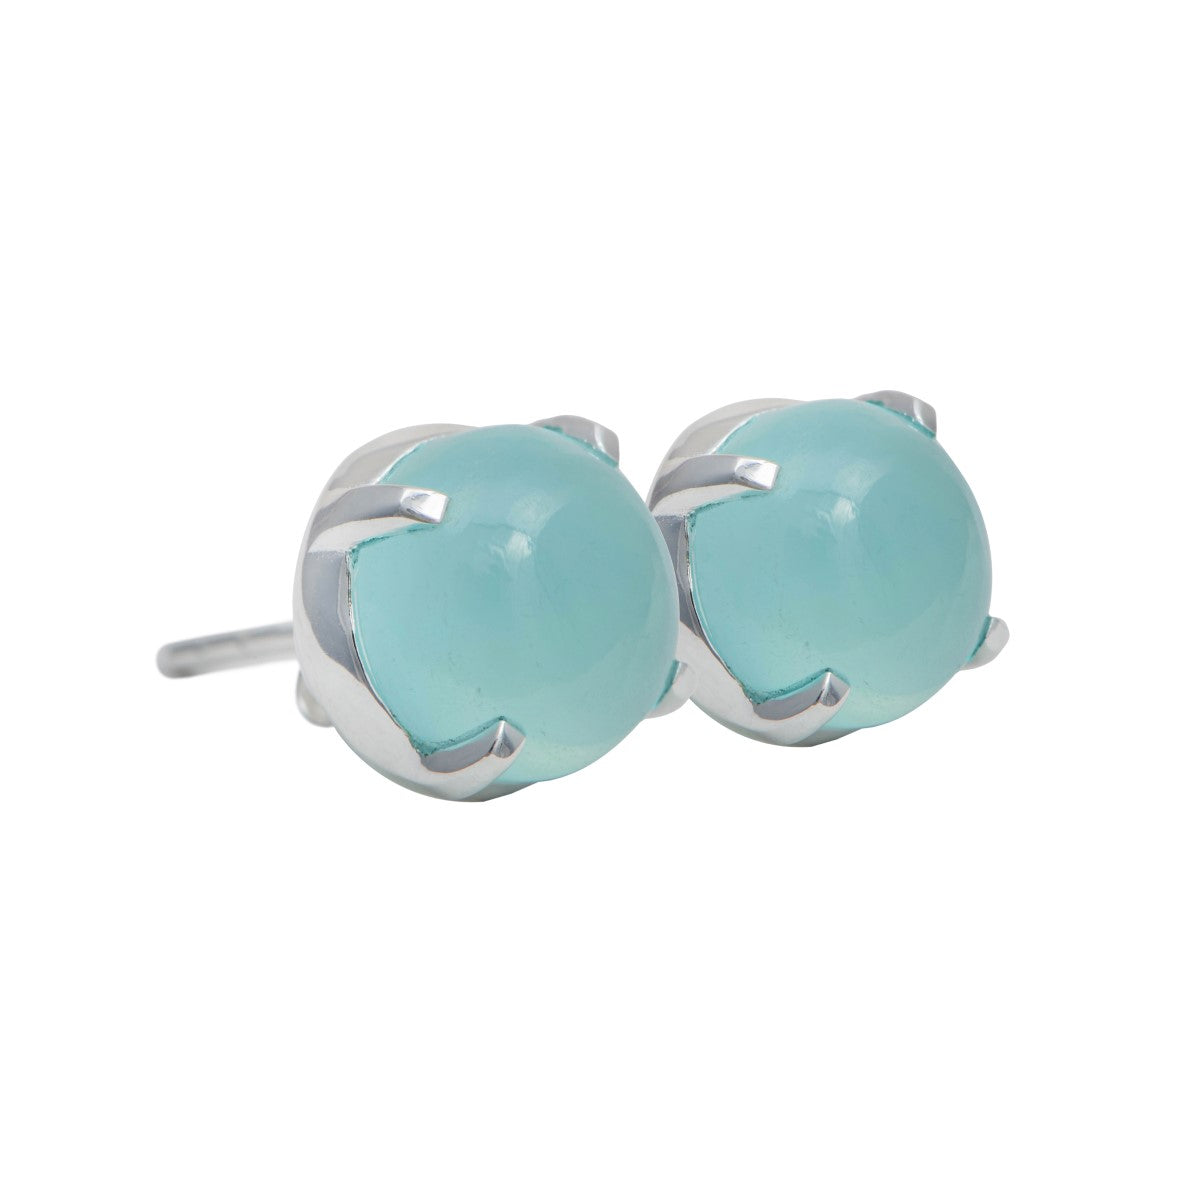 Round Cabochon Aqua Chalcedony Stud Earrings in Sterling Silver